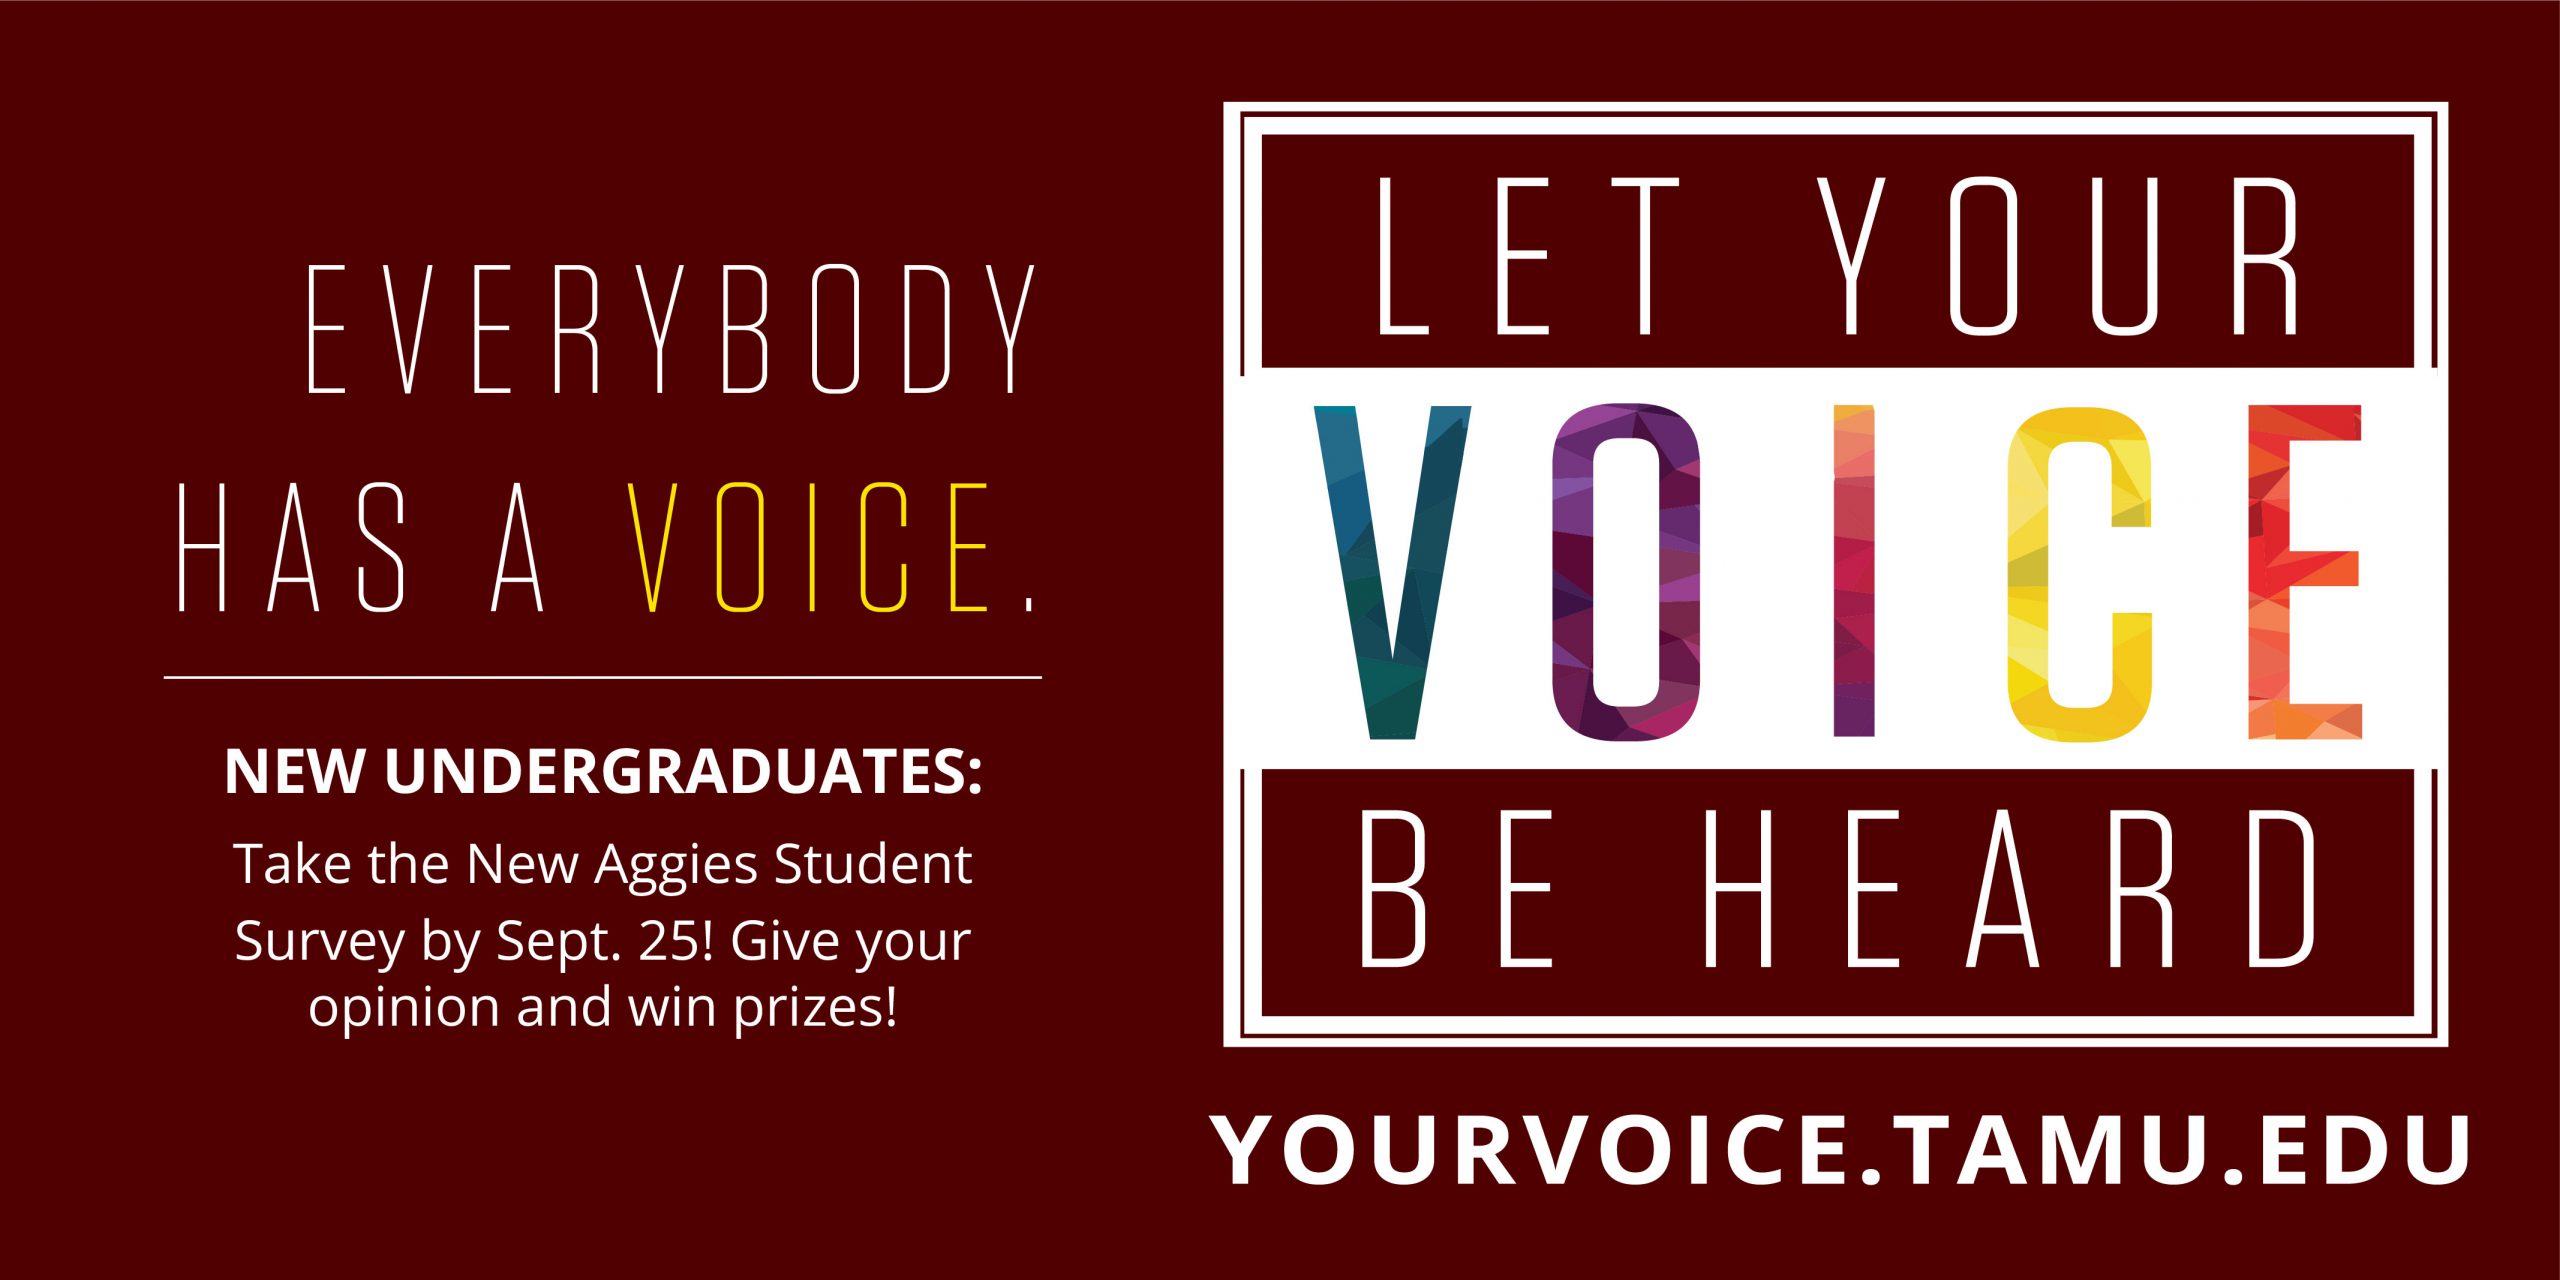 Graphic with the words "Everybody has a voice. Let your voice be heard." Survey website is yourvoice.tamu.edu.